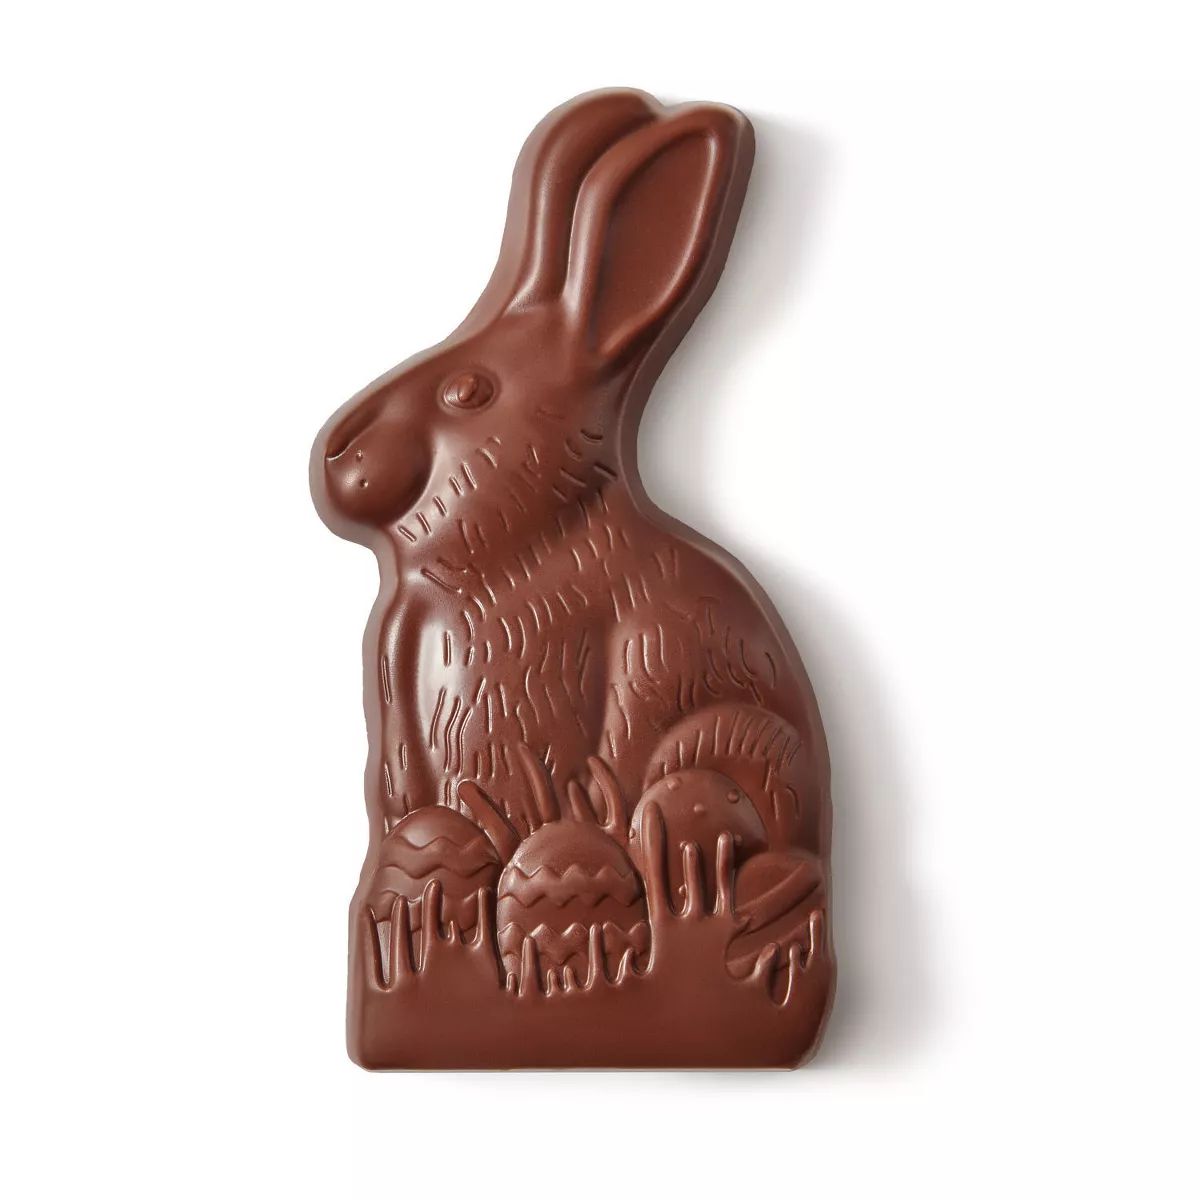 Hershey's Milk Chocolate Solid Bunny Easter Candy Gift Box - 5oz | Target